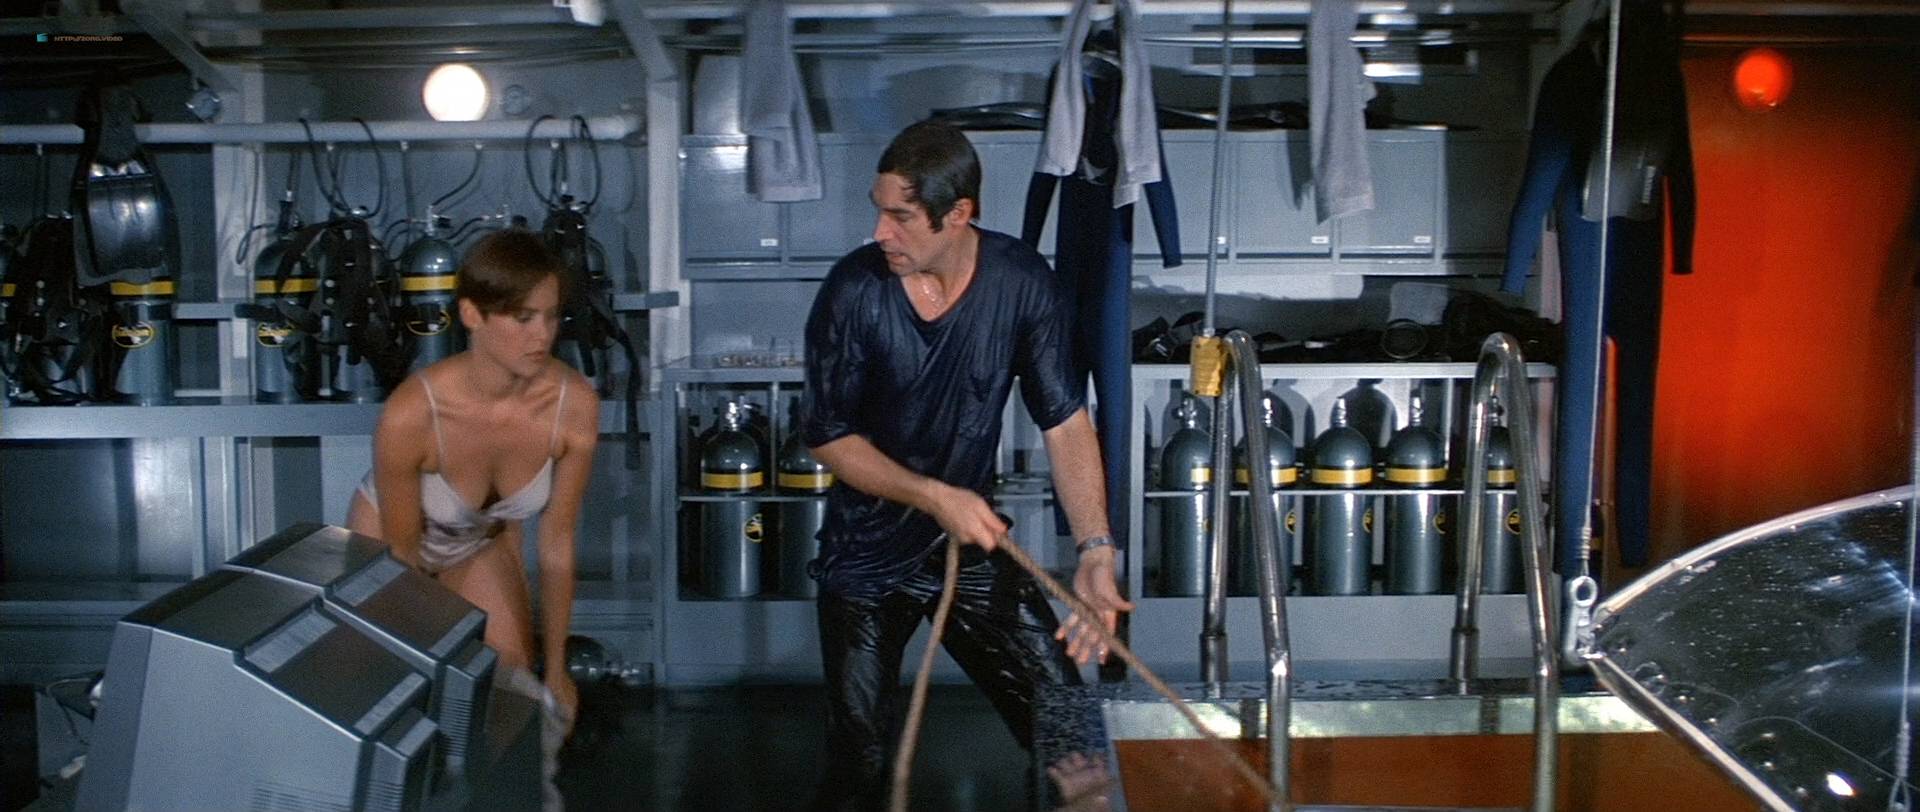 Carey Lowell hot leggy Talisa Soto hot and sexy - Licence to Kill (1989) HD 1080p BluRay (13)